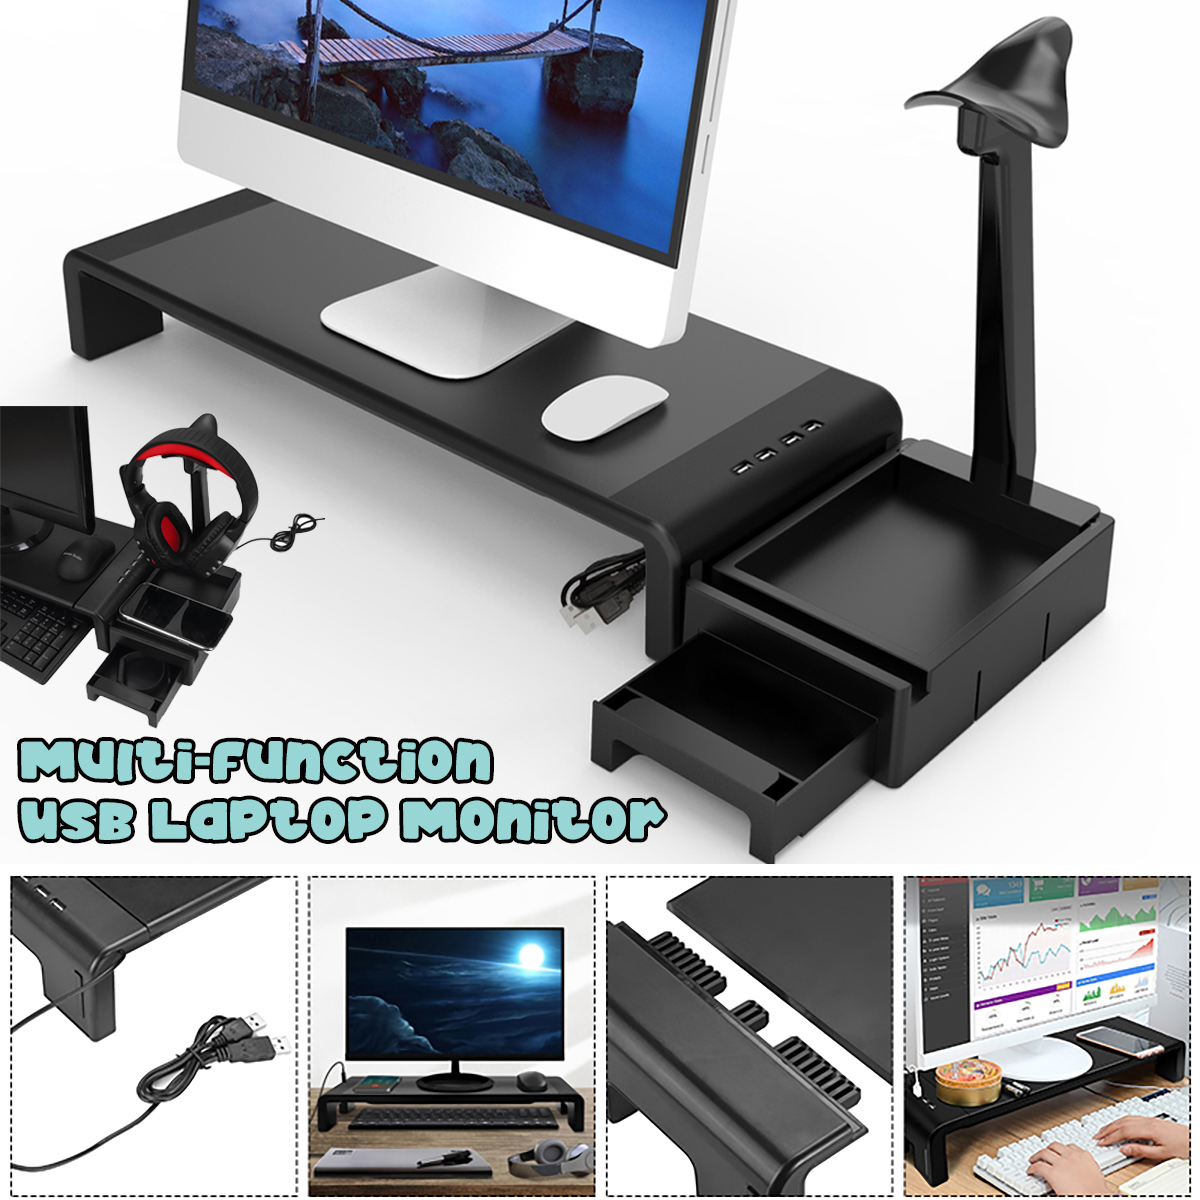 Laptop-Monitor-Stand-Computer-Riser-Monitor-Desktop-Stand-Riser-Foldable-with-USB-Charging-Storage-D-1909347-5